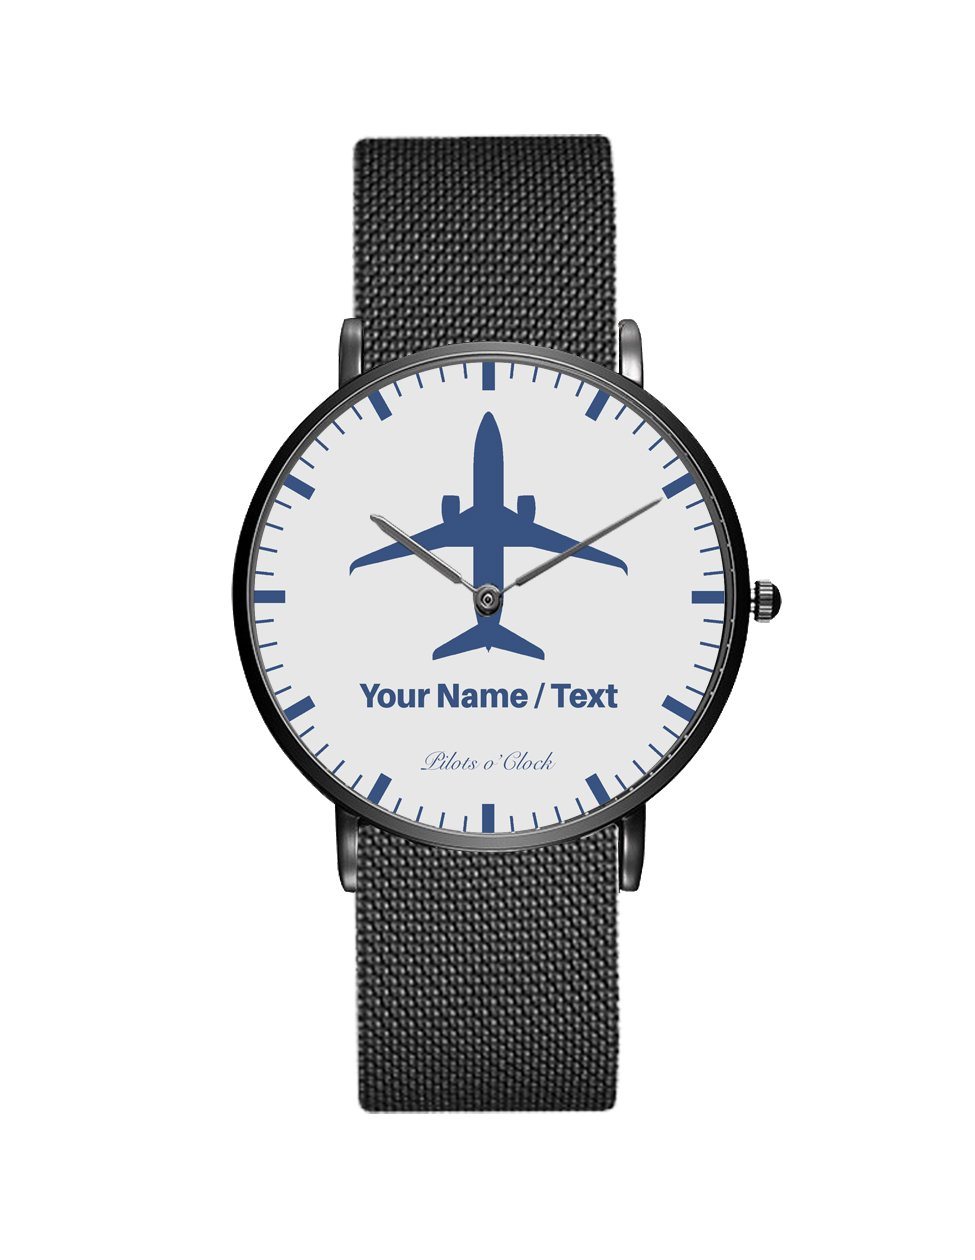 Your Name / Text Printed Stainless Steel Strap Watches Pilot Eyes Store Black & Stainless Steel Strap 